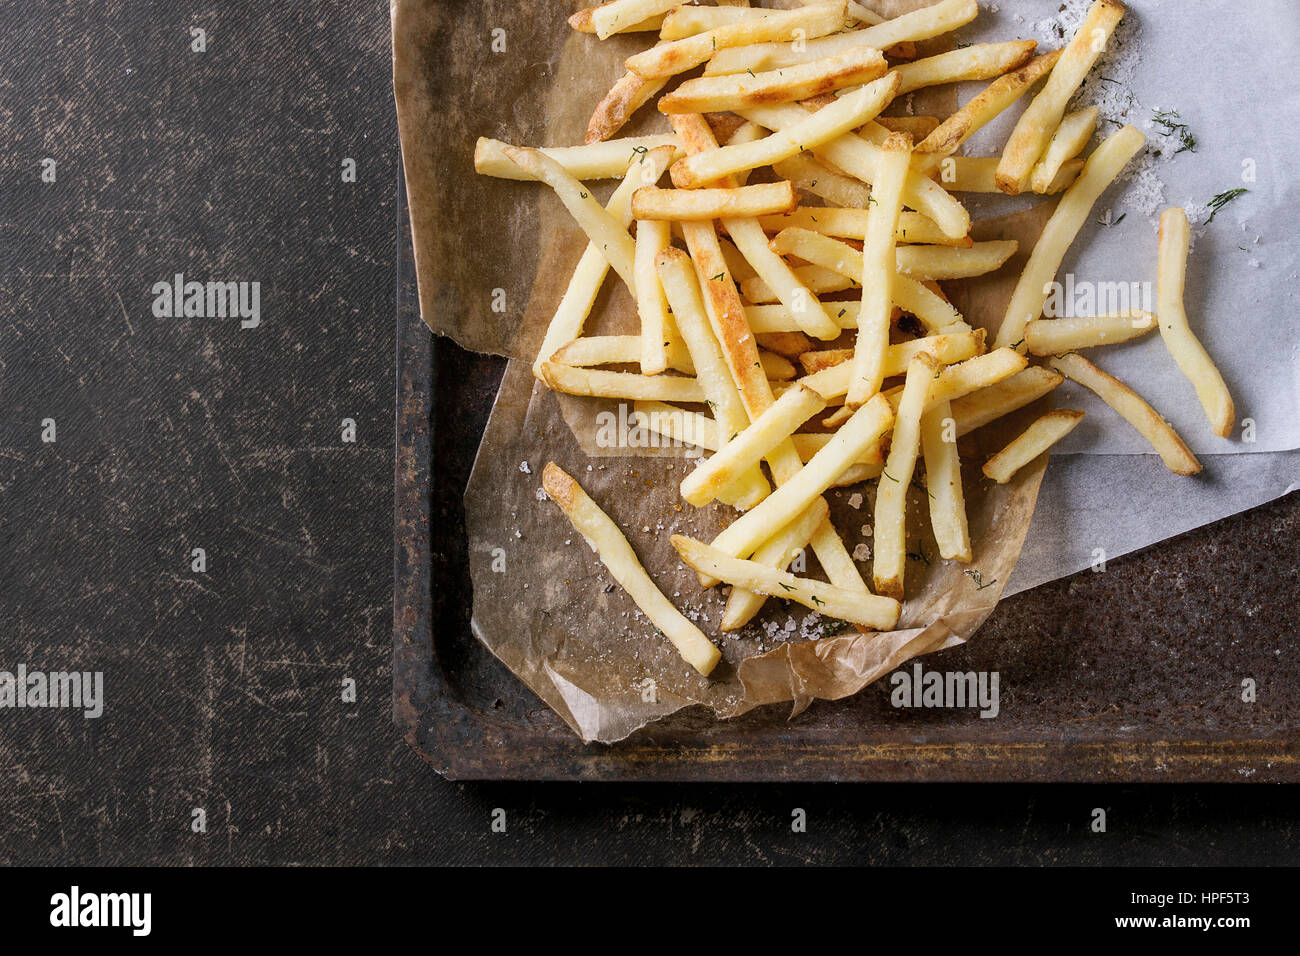 Fast food french fries potatoes with skin served with salt and herbs on baking paper on old rusty oven tray over dark texture background. Top view, sp Stock Photo